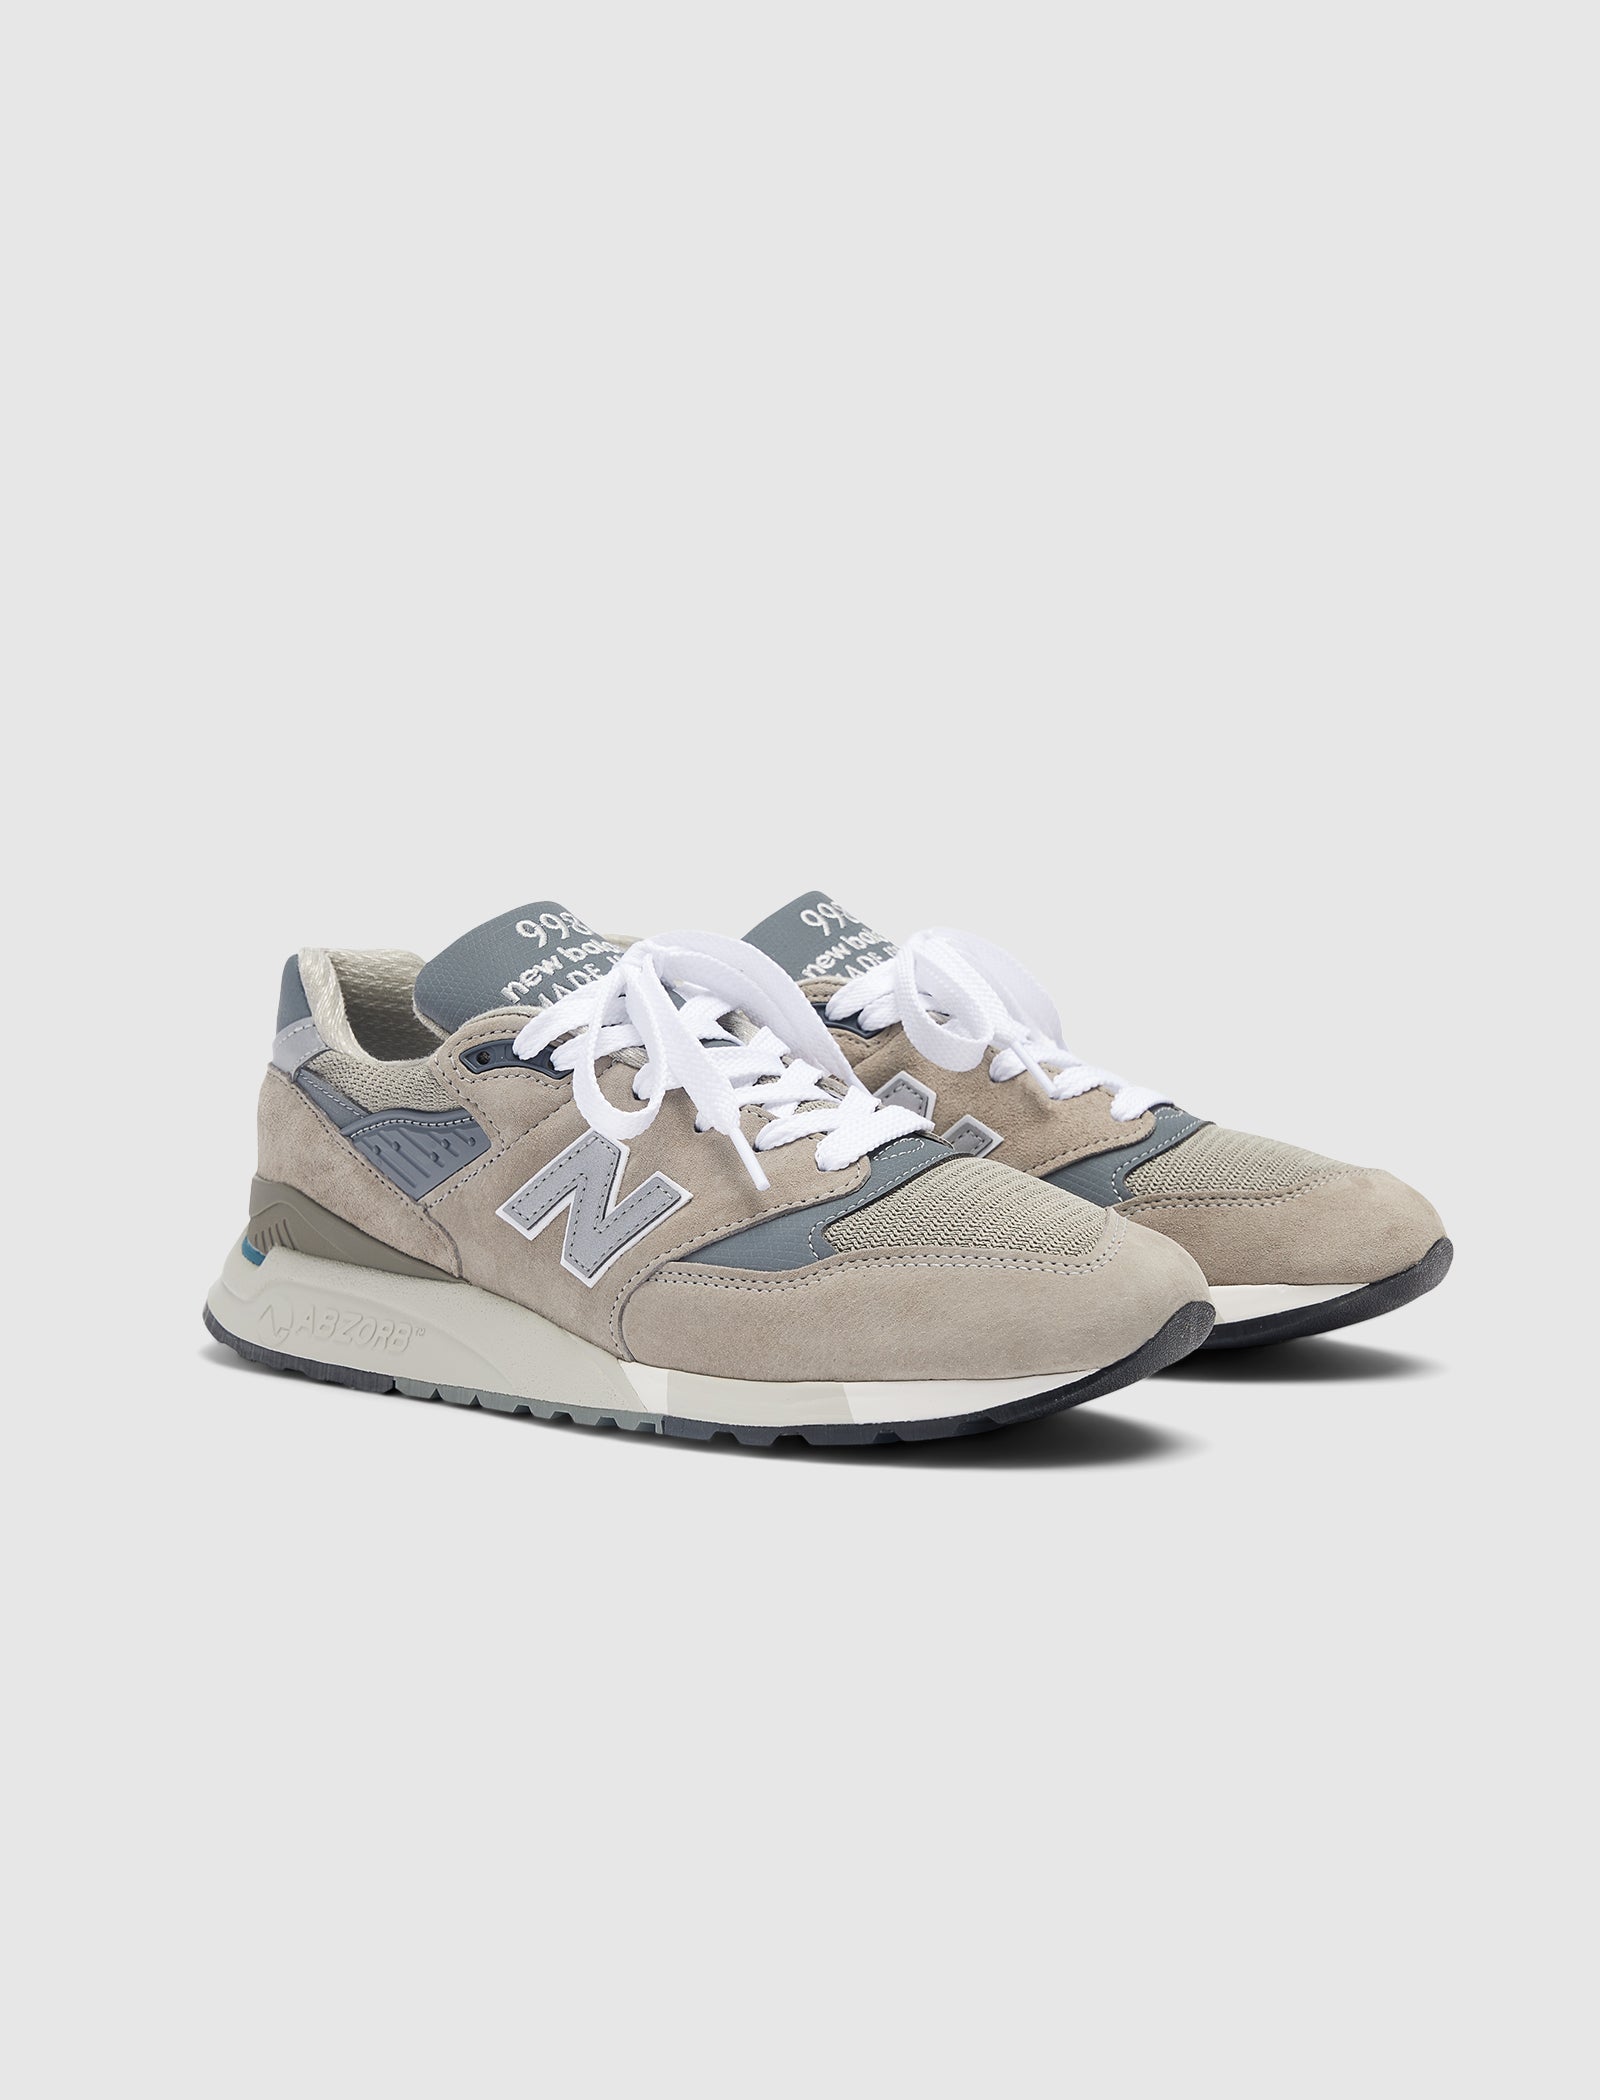 MADE IN USA 998 "GREY/SILVER"